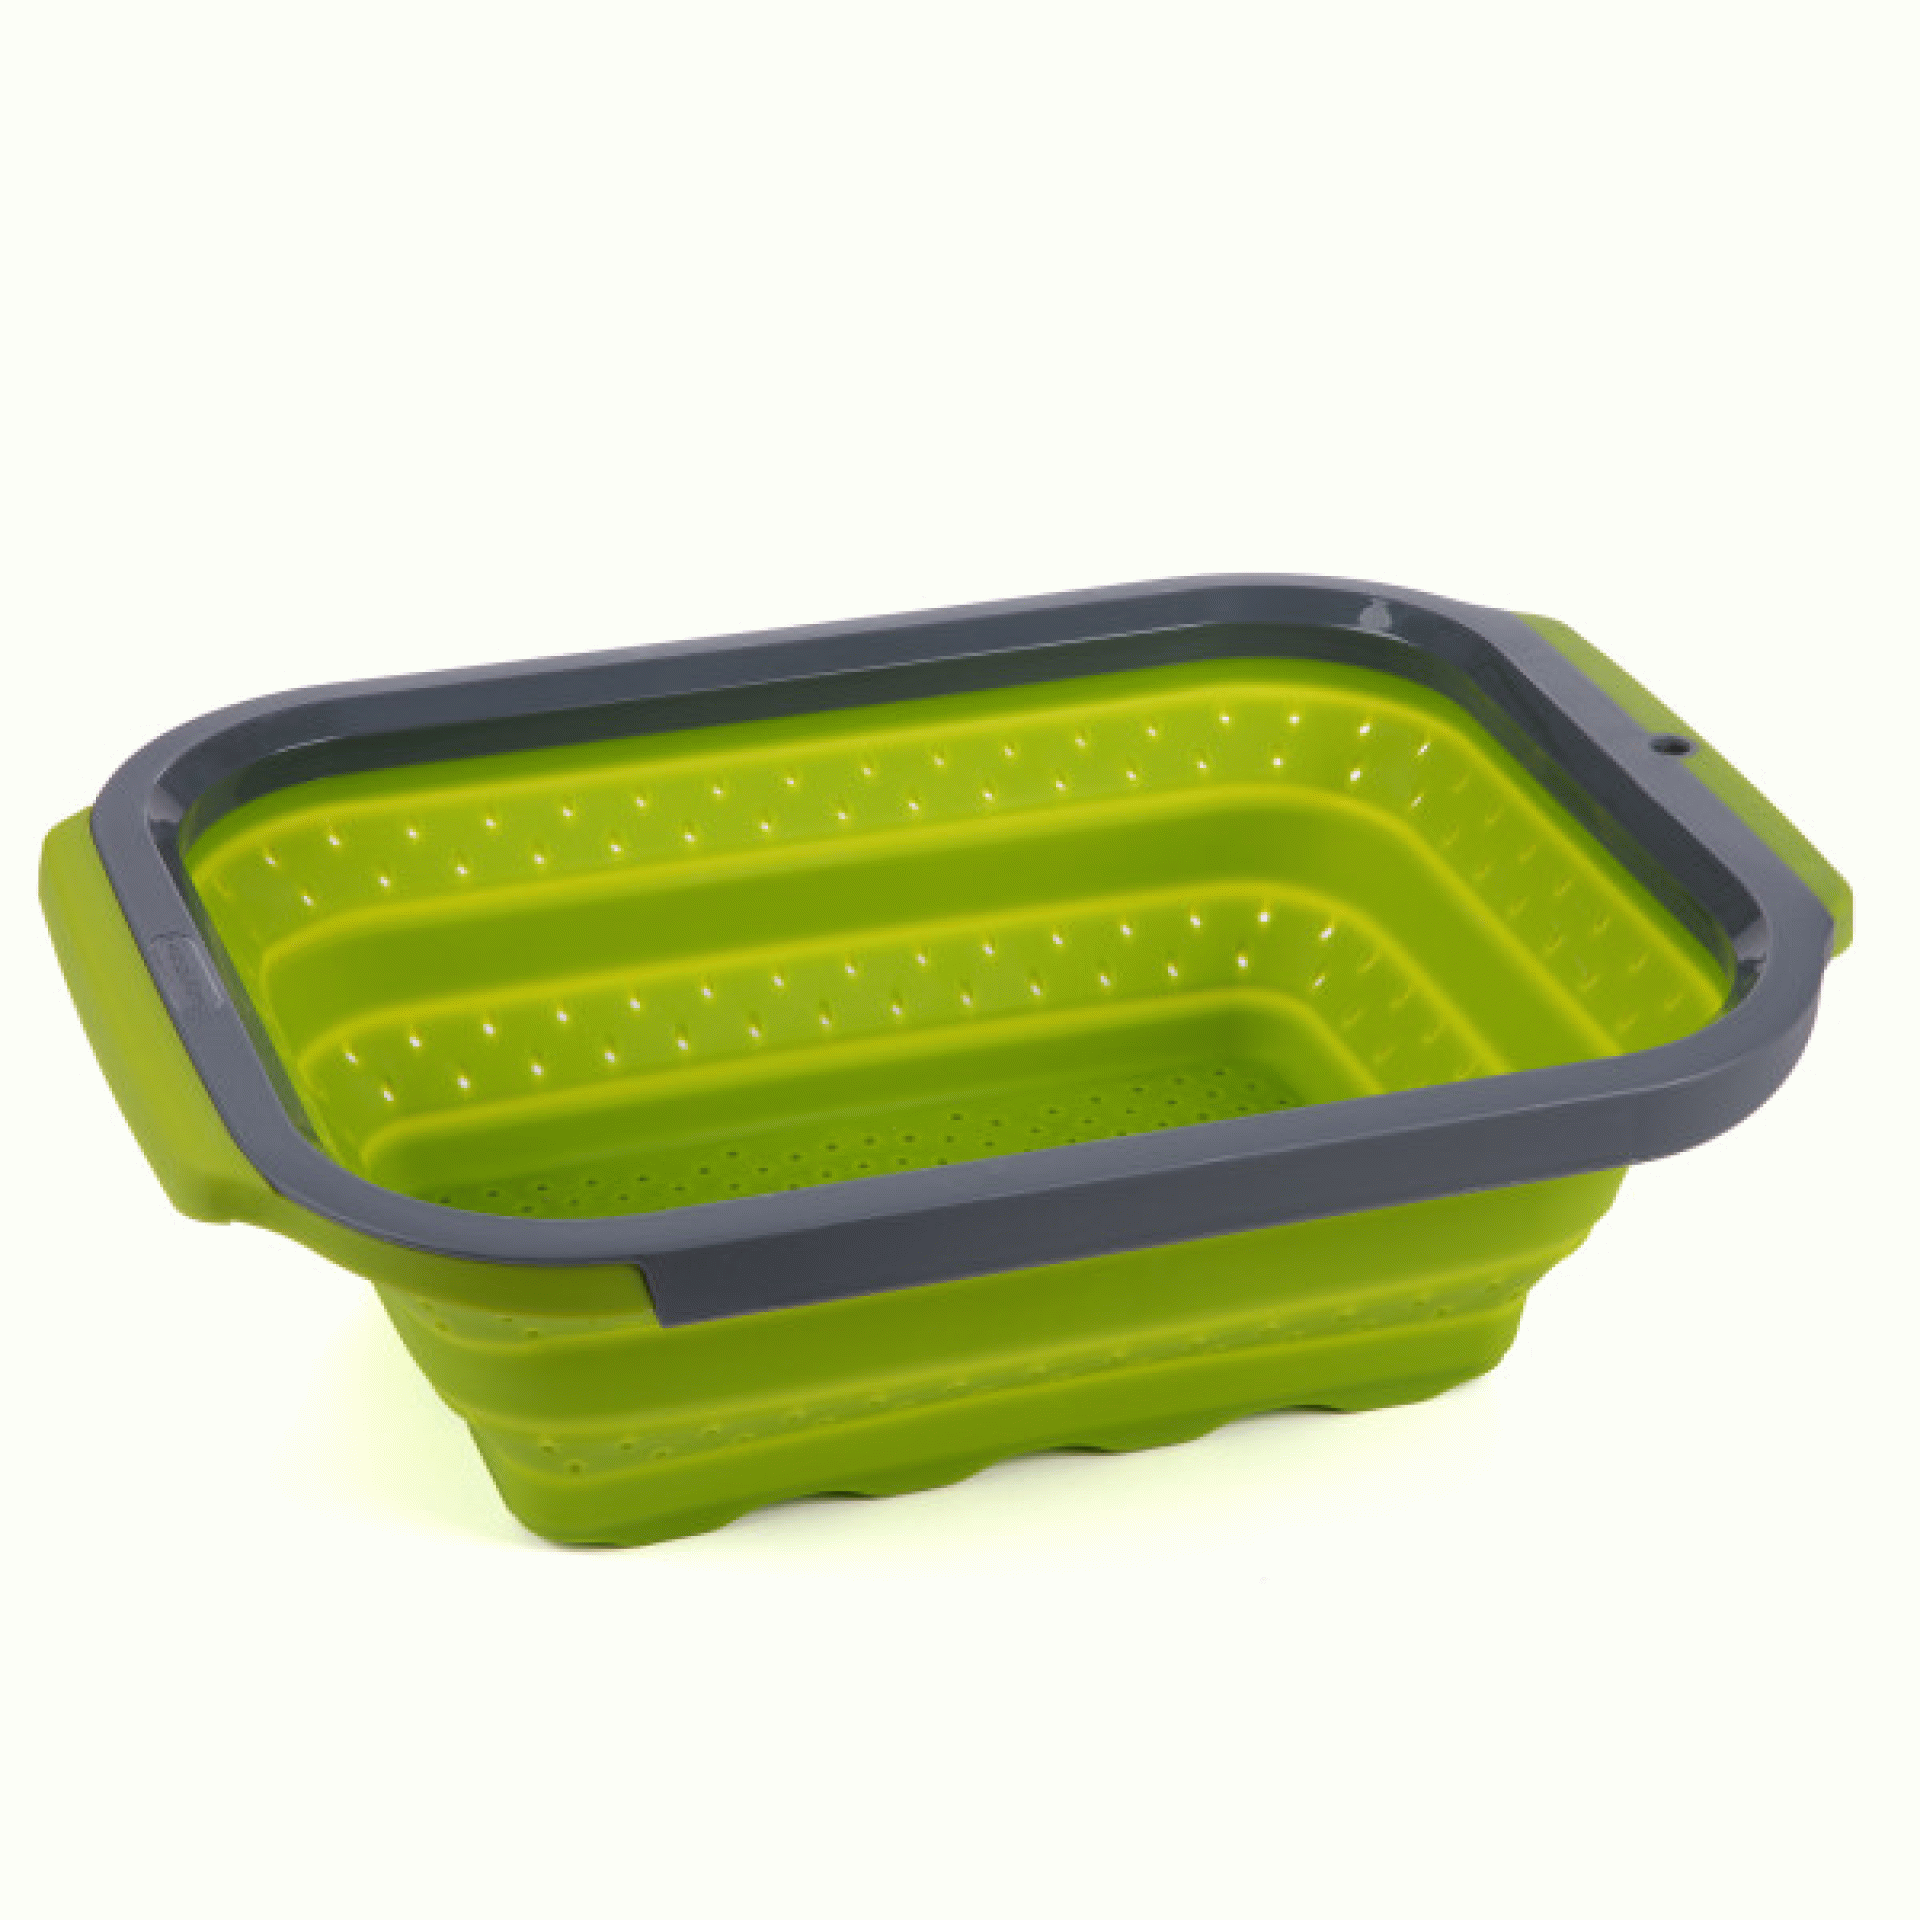 PROGRESSIVE INTERNATIONAL CORP. | PS-3509 | Collapsible Over the Sink Colander